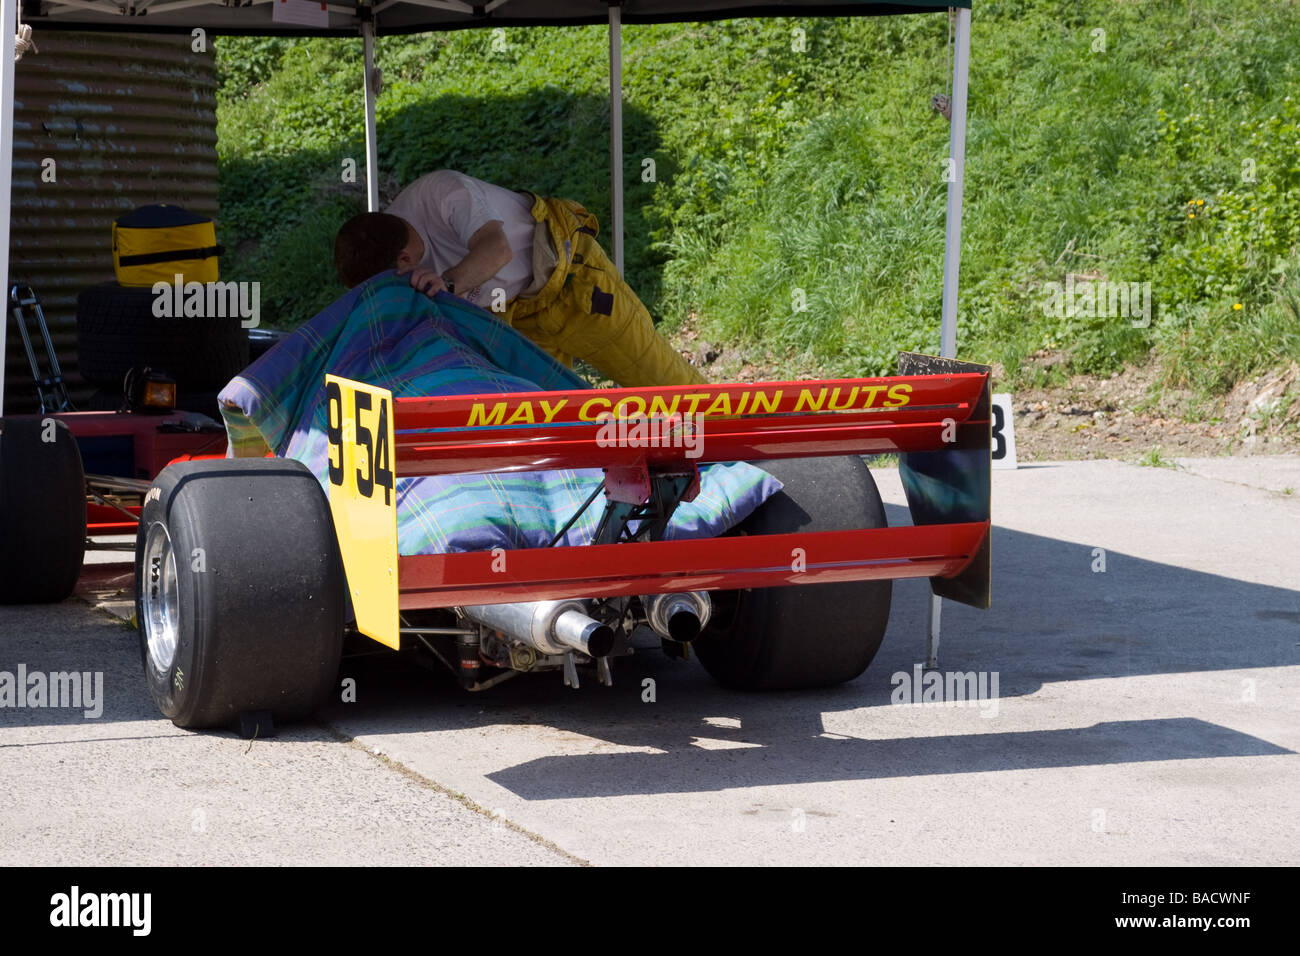 Hill Climb racing car with signage on rear spoiler 'May Contain Nuts' Stock Photo